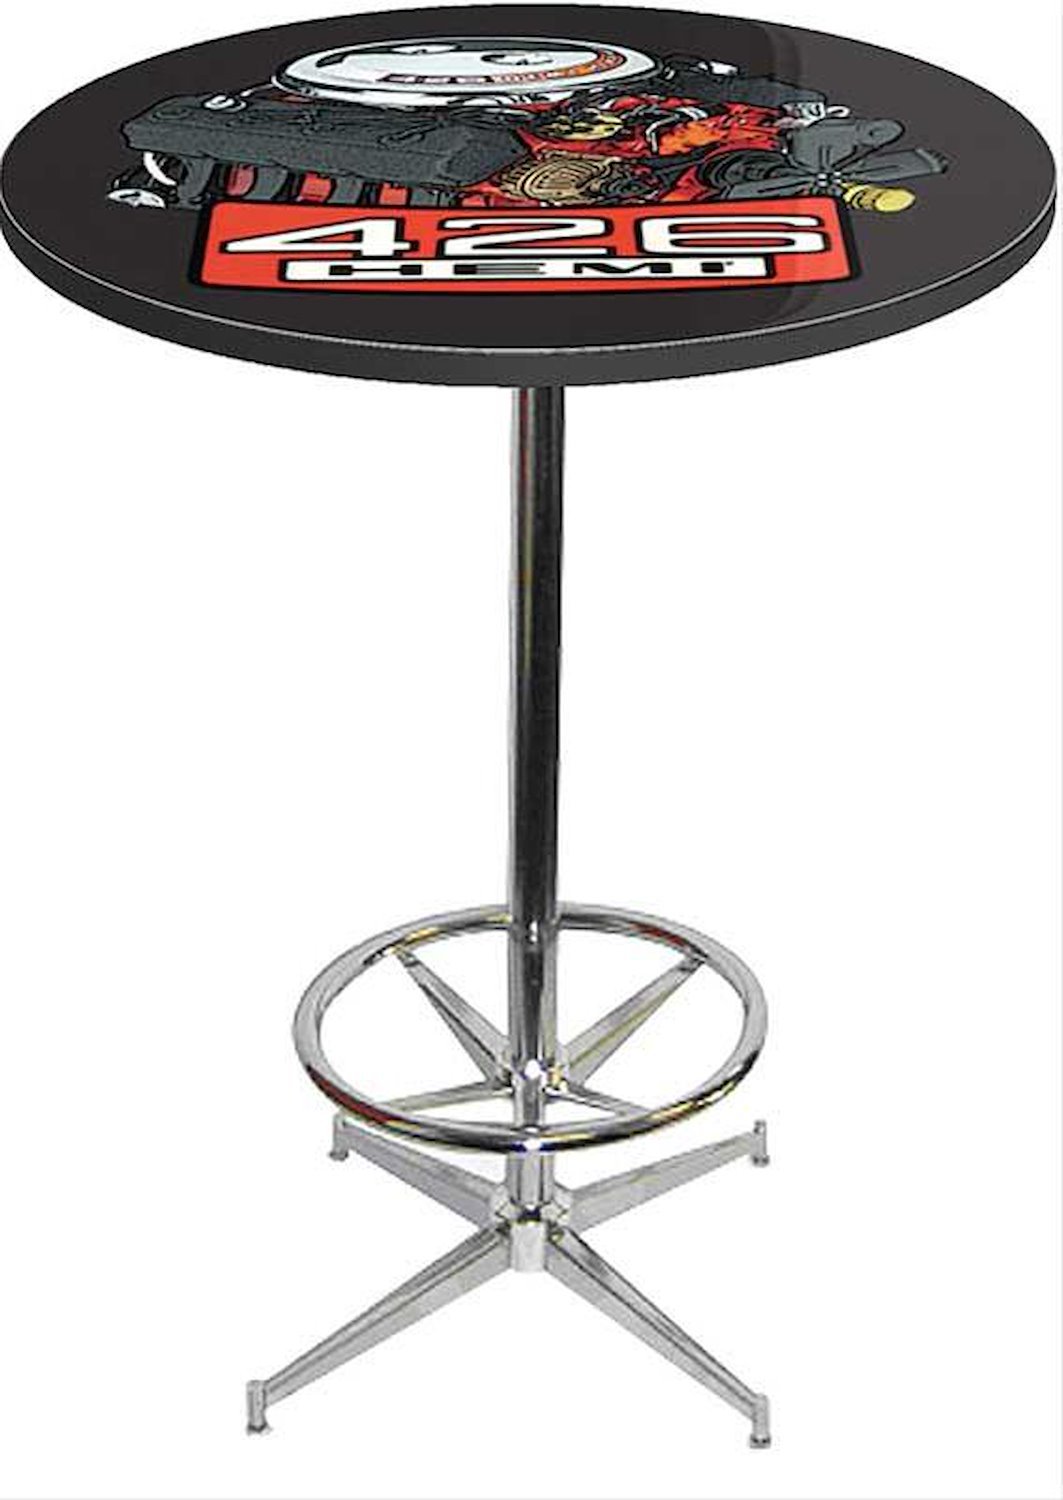 MD673113 Pub Table With Chrome Base And Foot Rest Mopar 426 Hemi Logo Pub Table With Chrome Base And Foot Rest